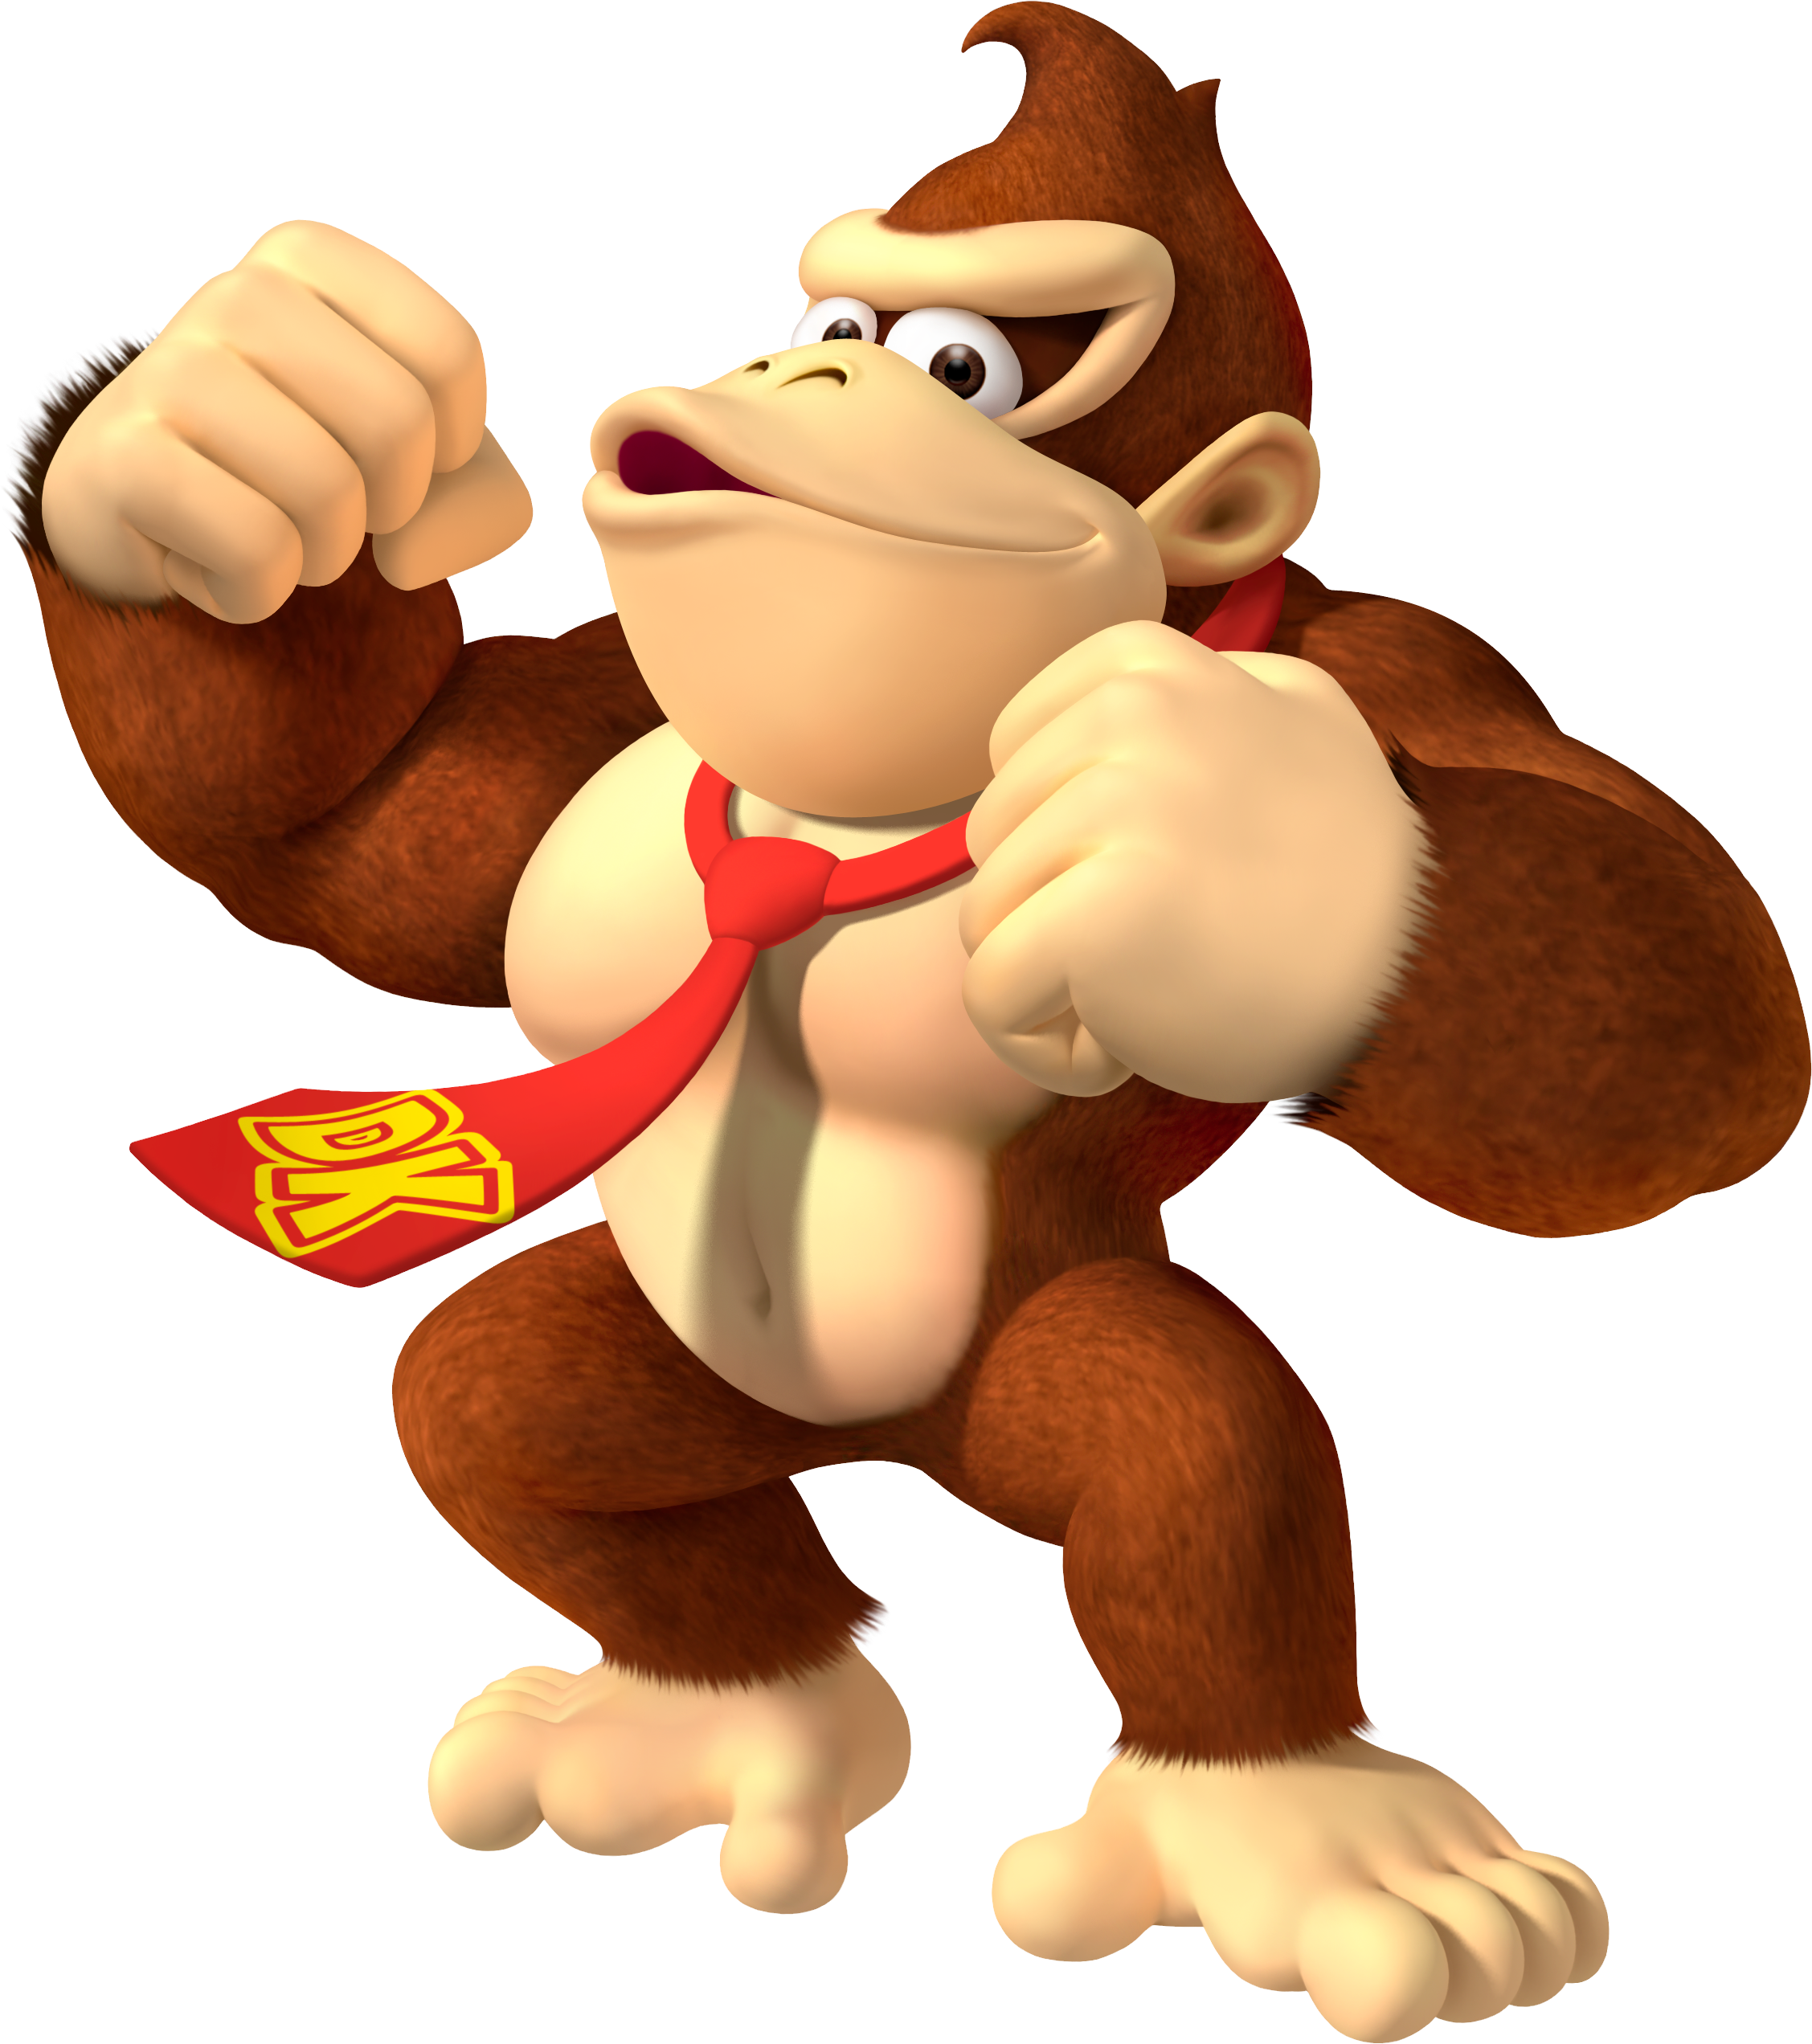 Donkey Kong Character Scratchpad Fandom - buff naked chest roblox